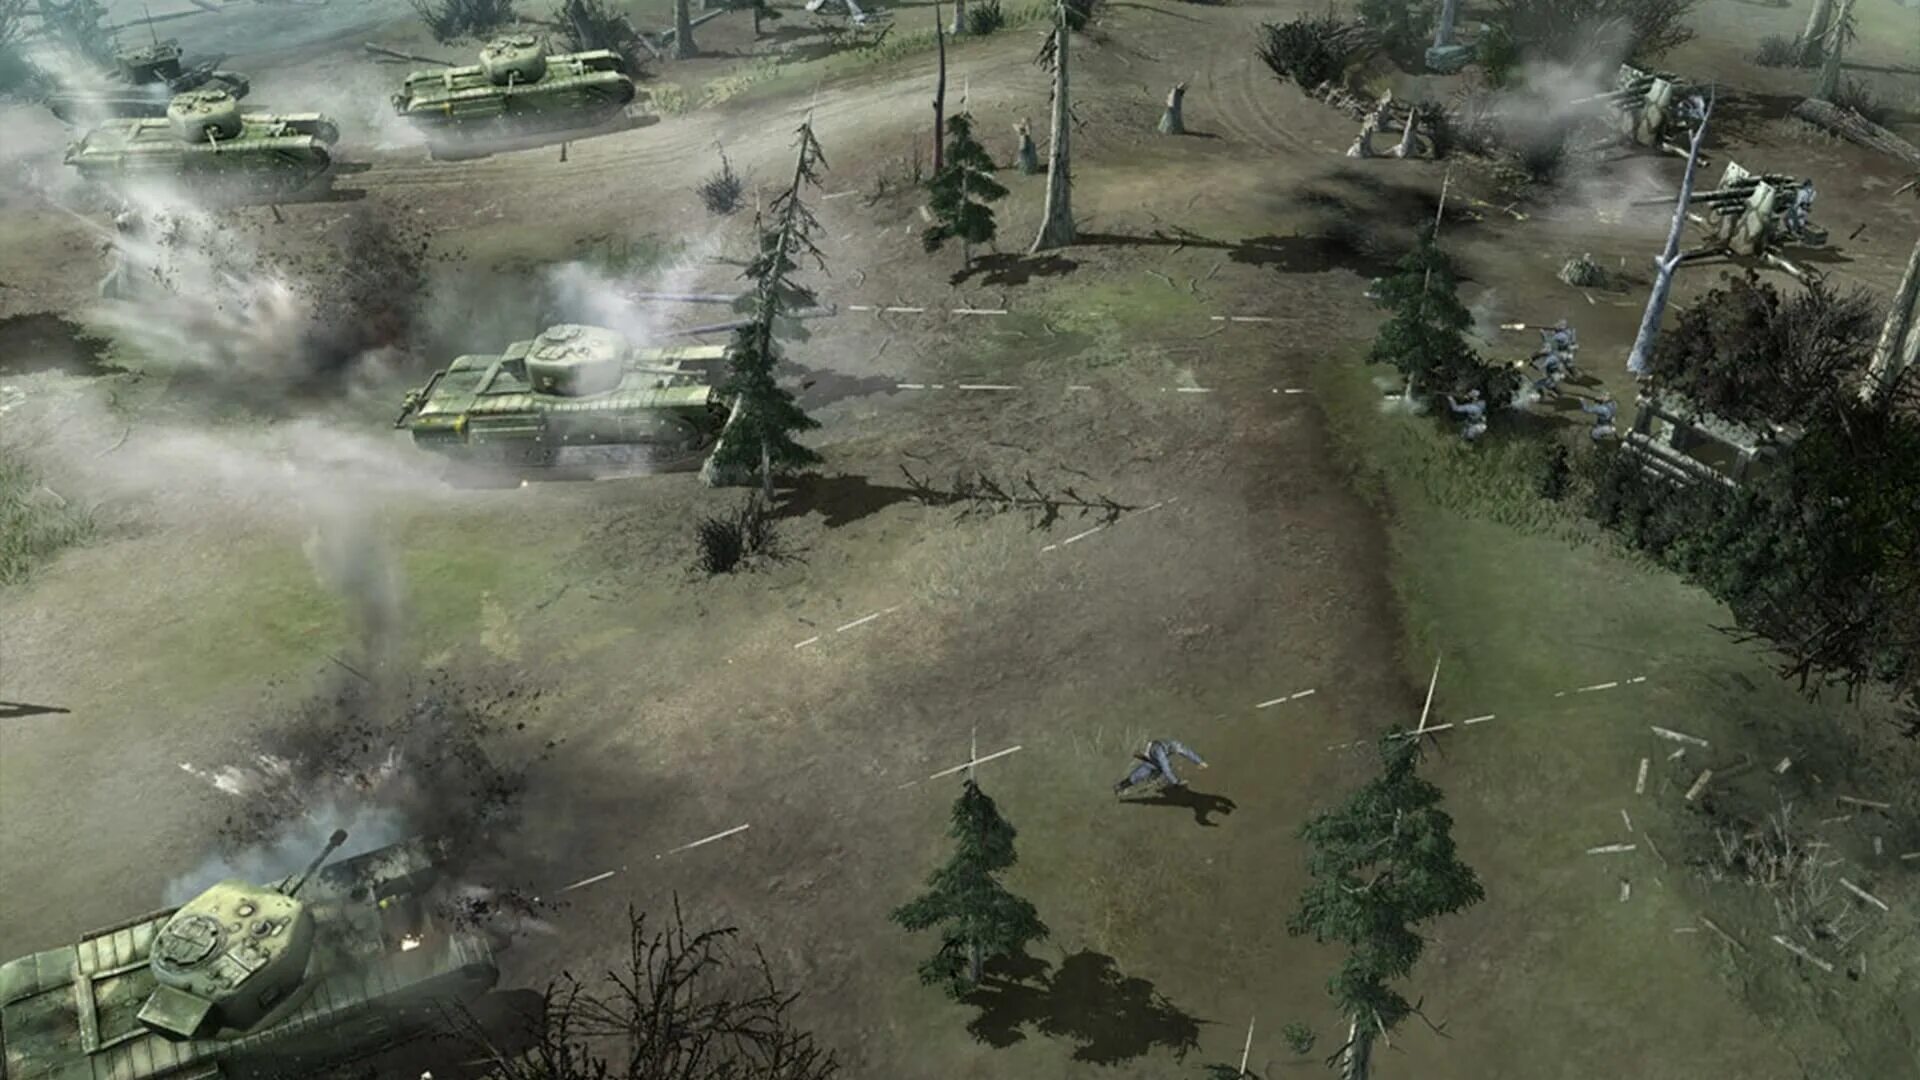 Company of Heroes opposing Fronts. Company of Heroes — opposing Fronts (2007). Company of Heroes opposing Fronts операция огород. Company of Heroes 2 кв 1. Company of heroes opposing